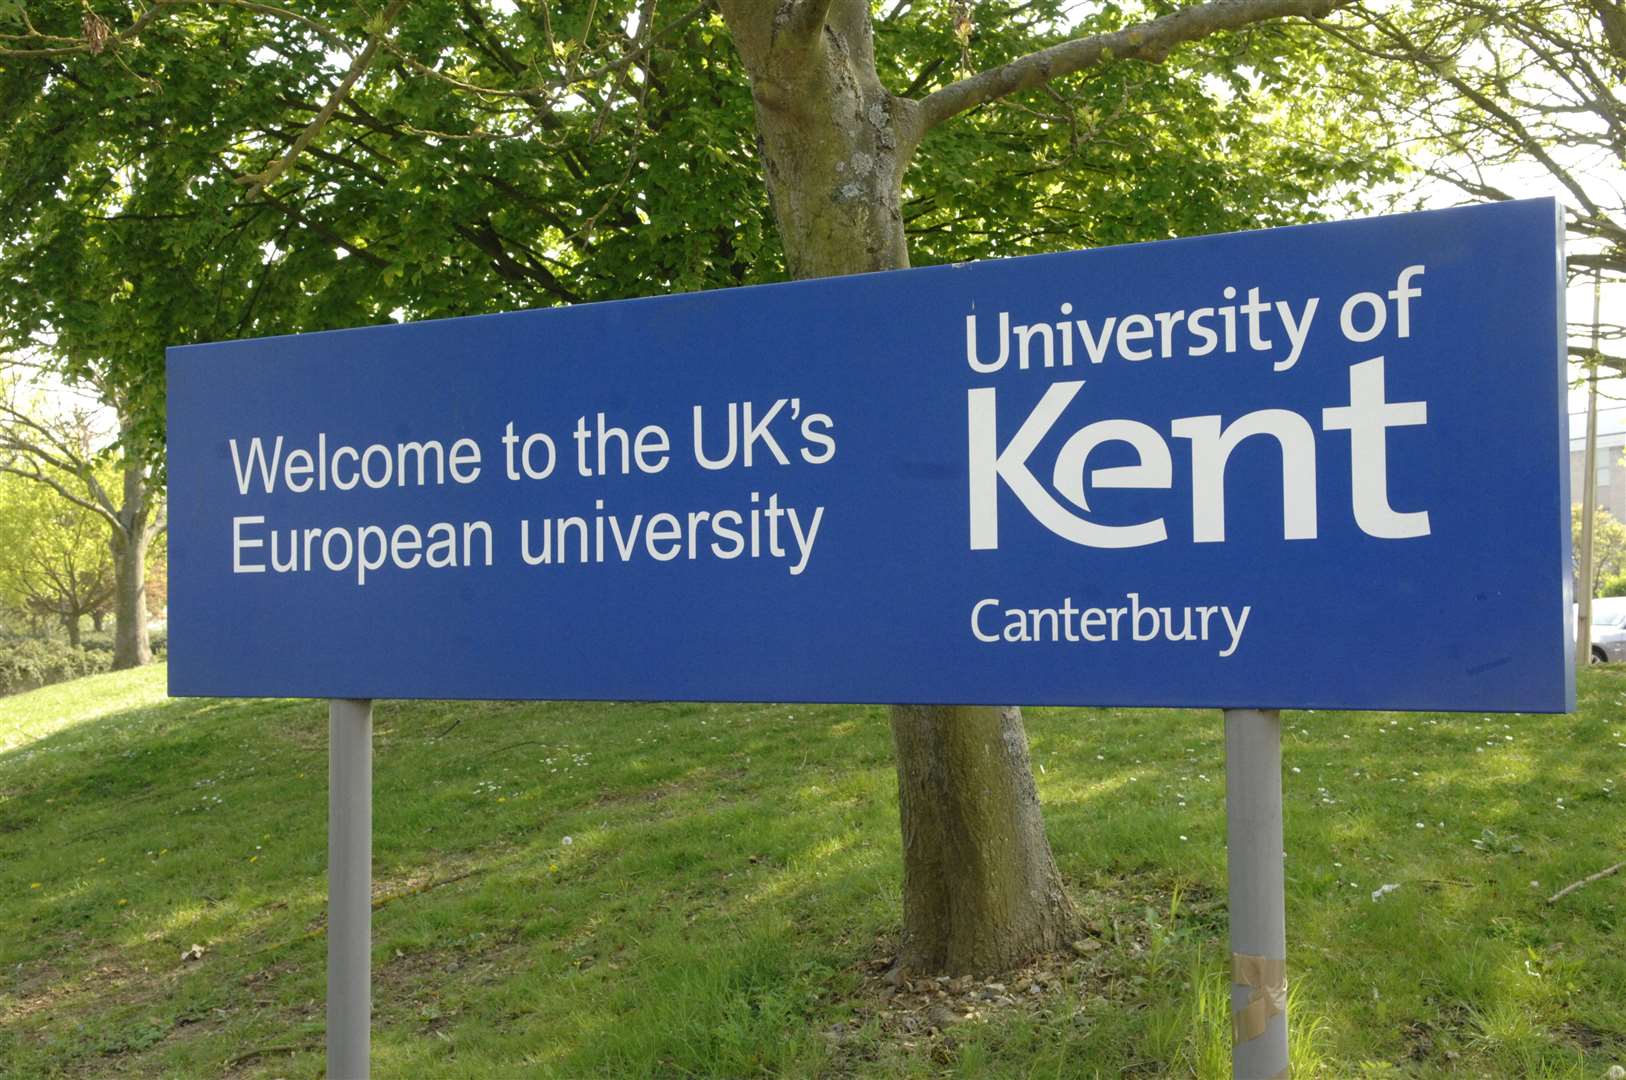 The University of Kent at Canterbury Picture: Chris Davey